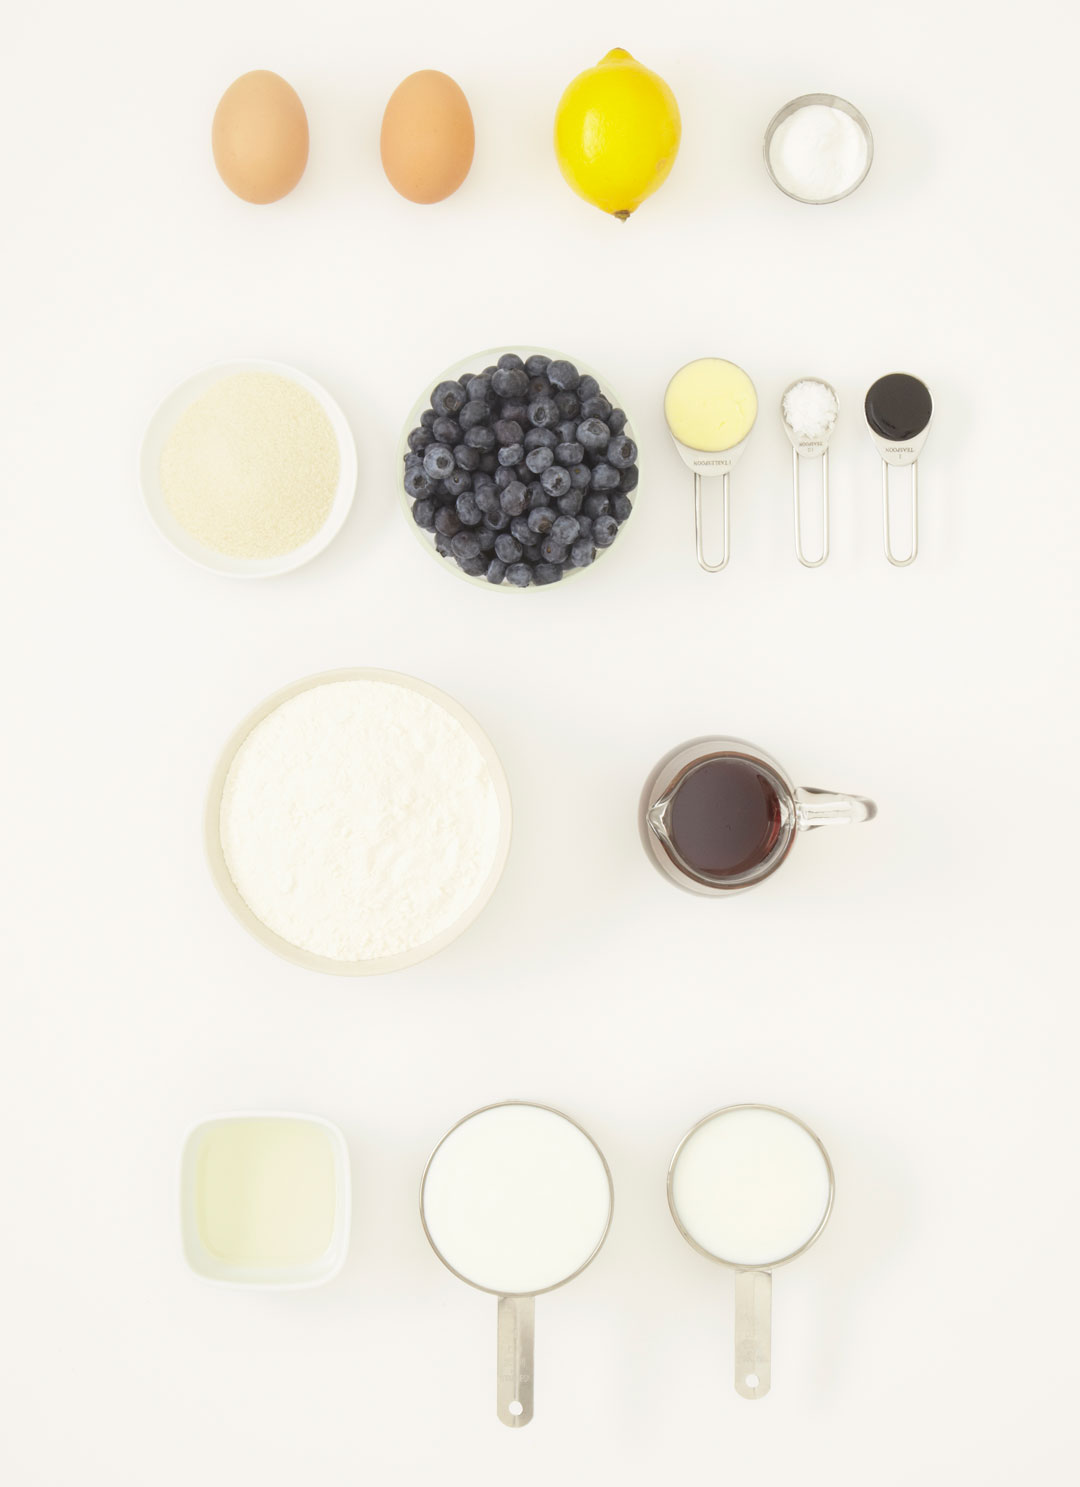 Ingredients for buttermilk pancakes with blueberries and syrup, as featured in Simple & Classic